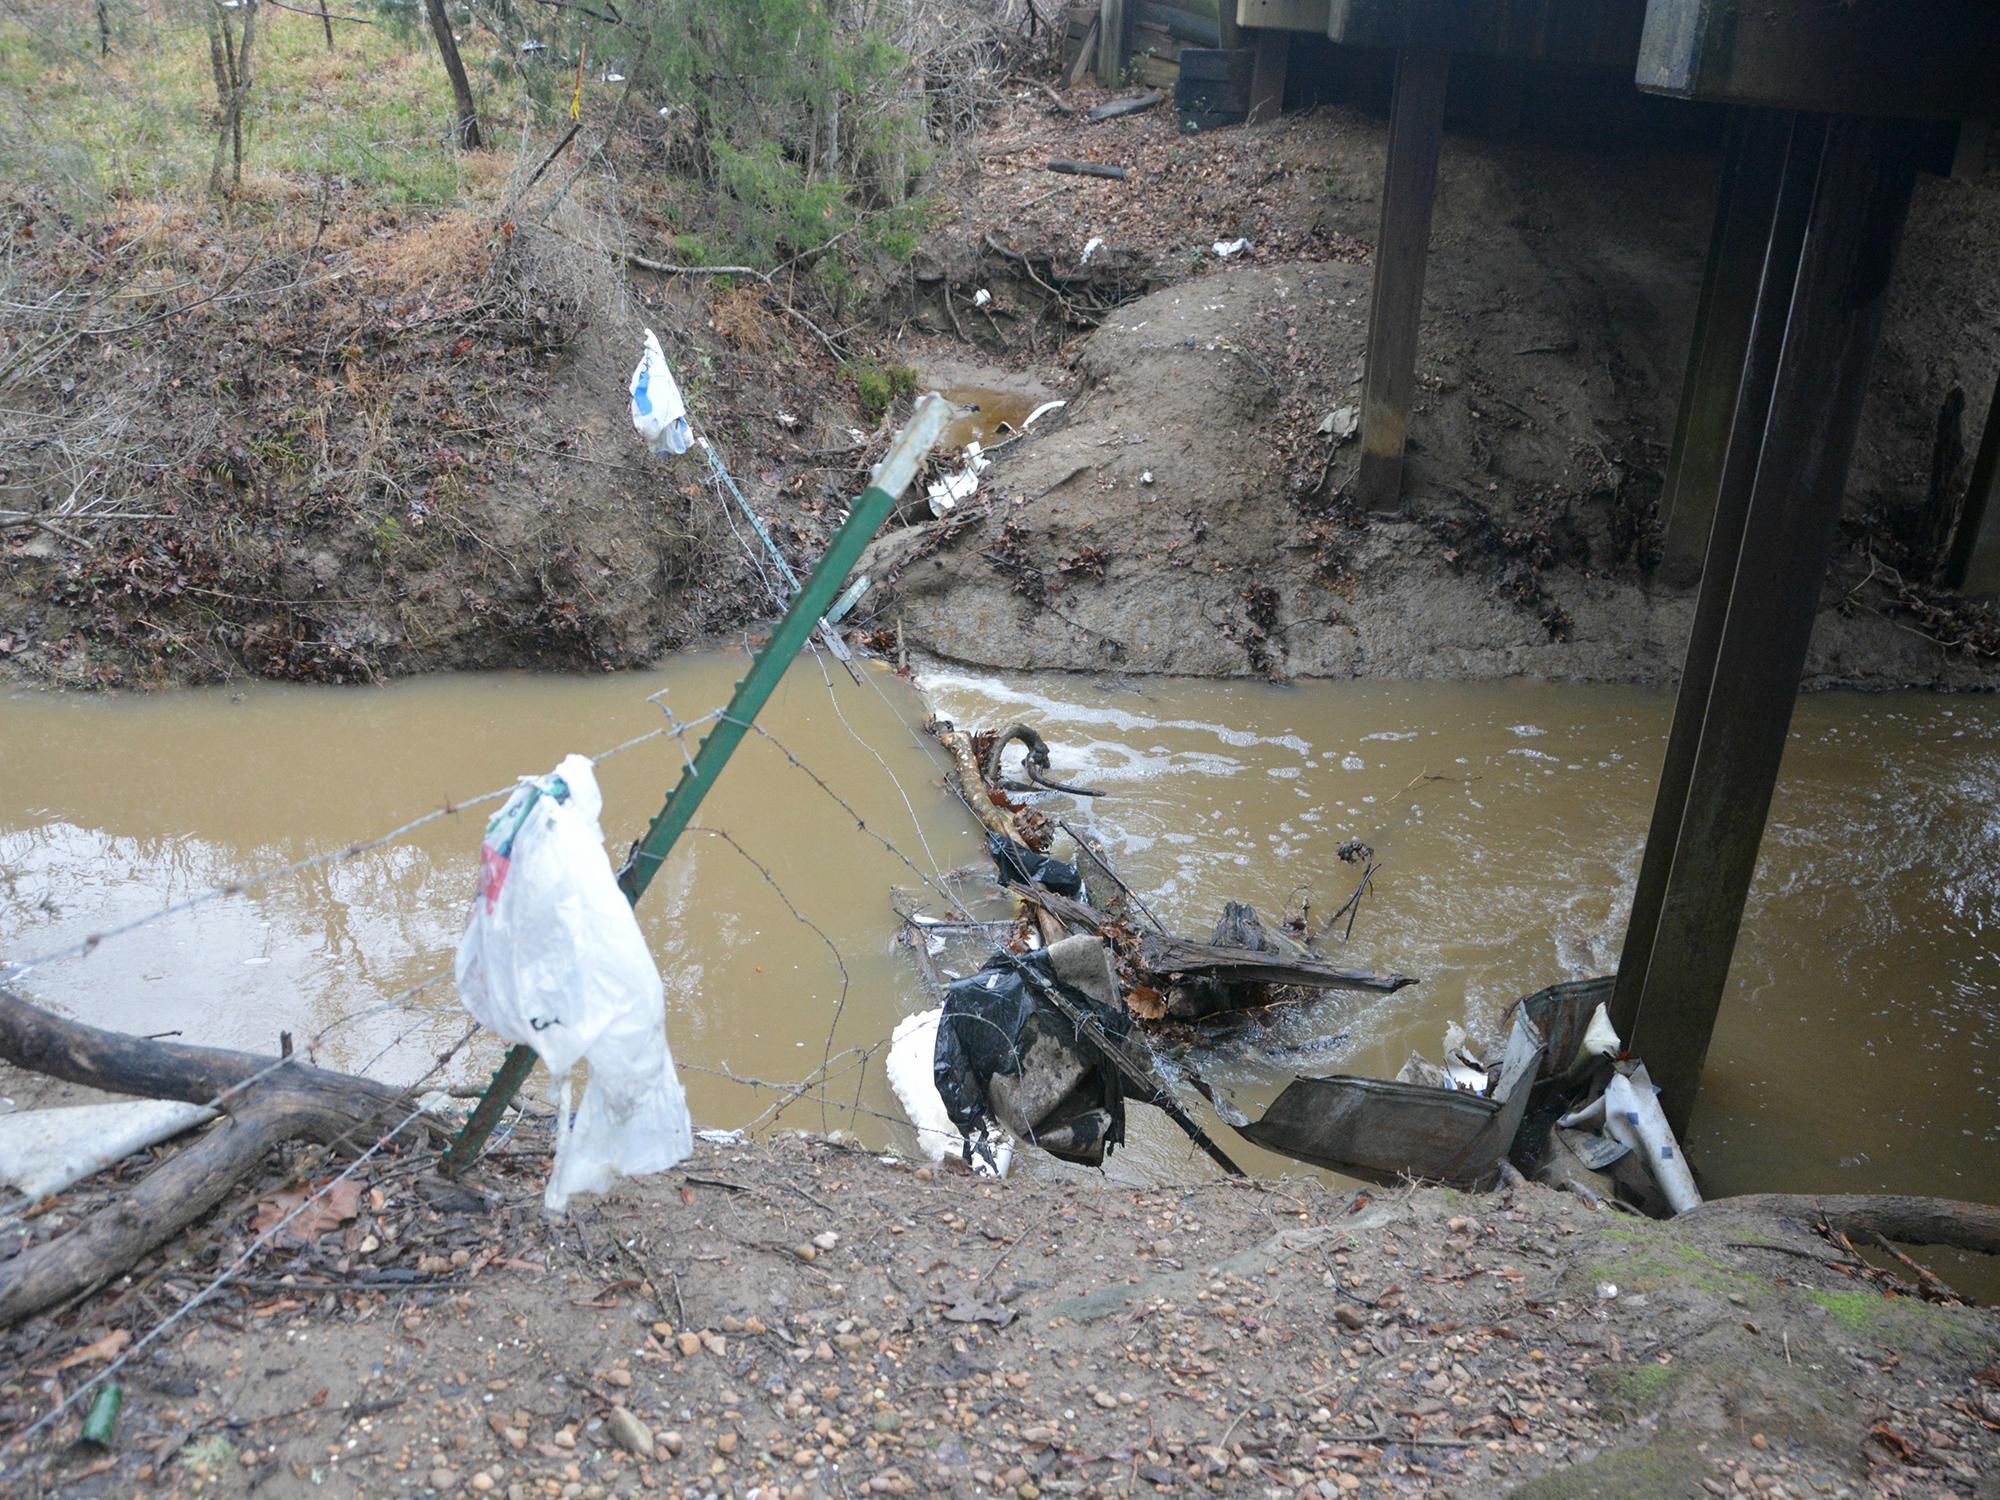 A drainage ditch with moving water, limbs, and trash.